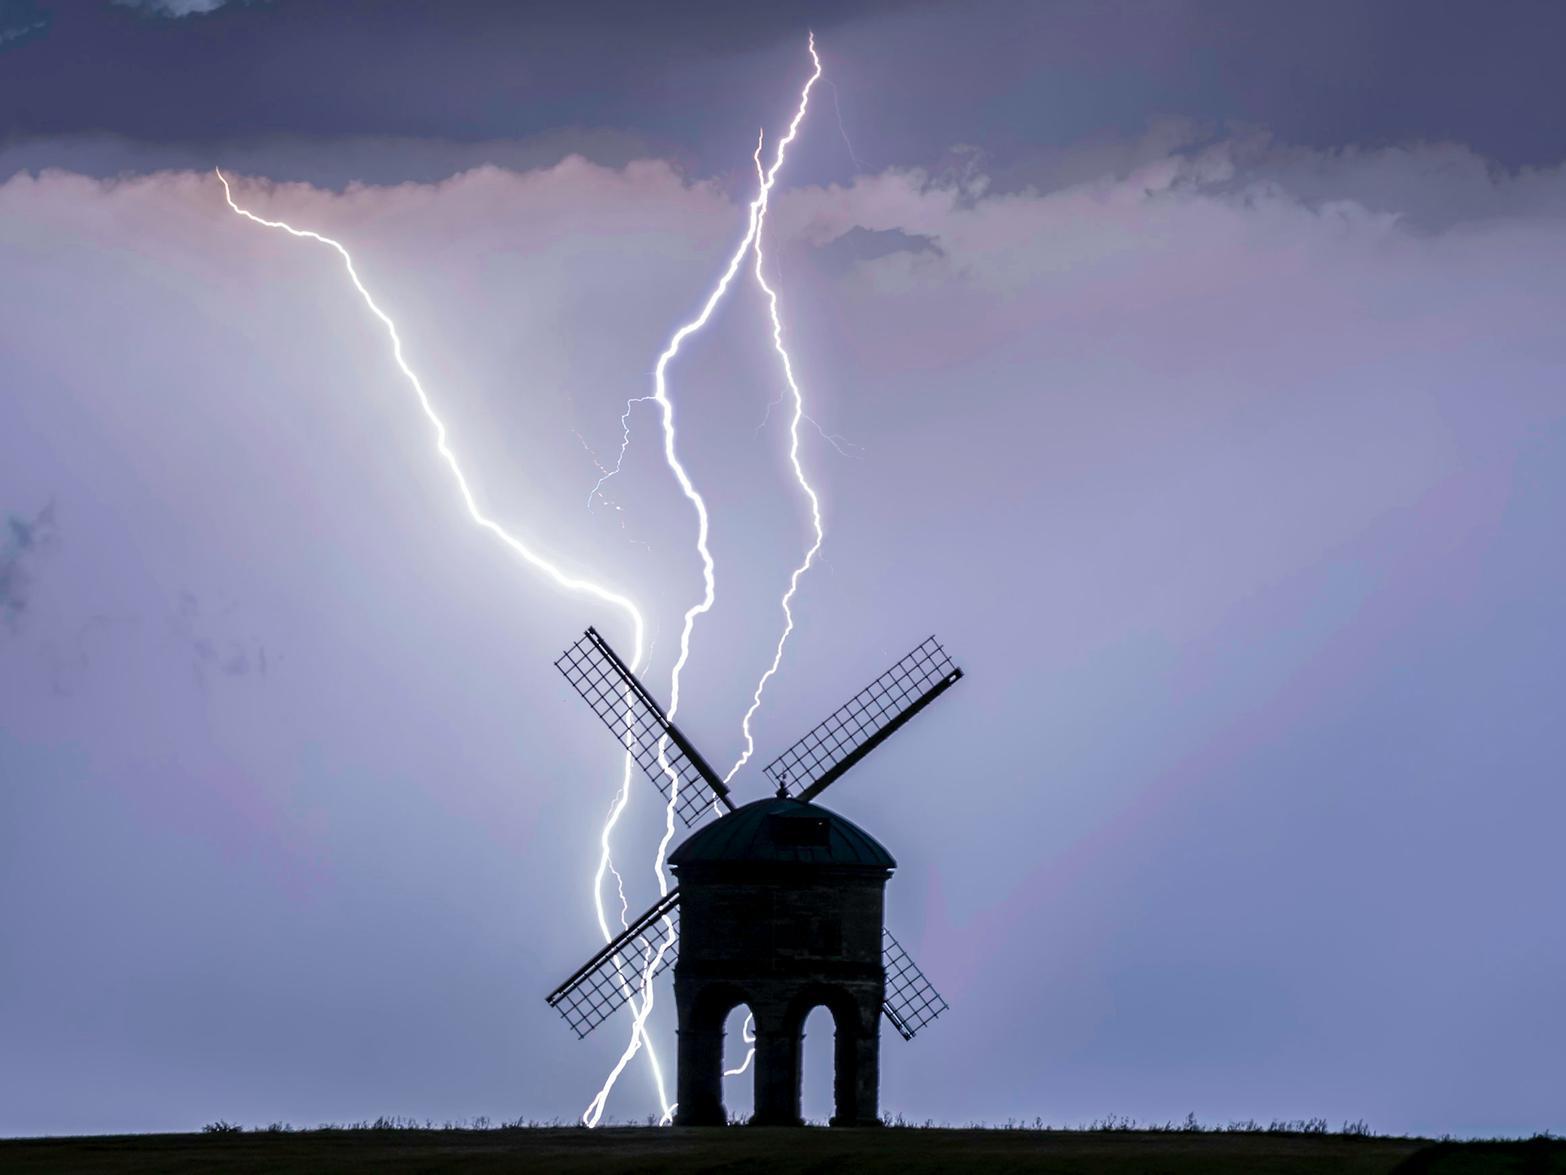 This stunning image by Chad Gordon Higgins captured the moment lightning struck at a historic windmill as heavy thunderstorms battered Britain in July.
See below for more information.